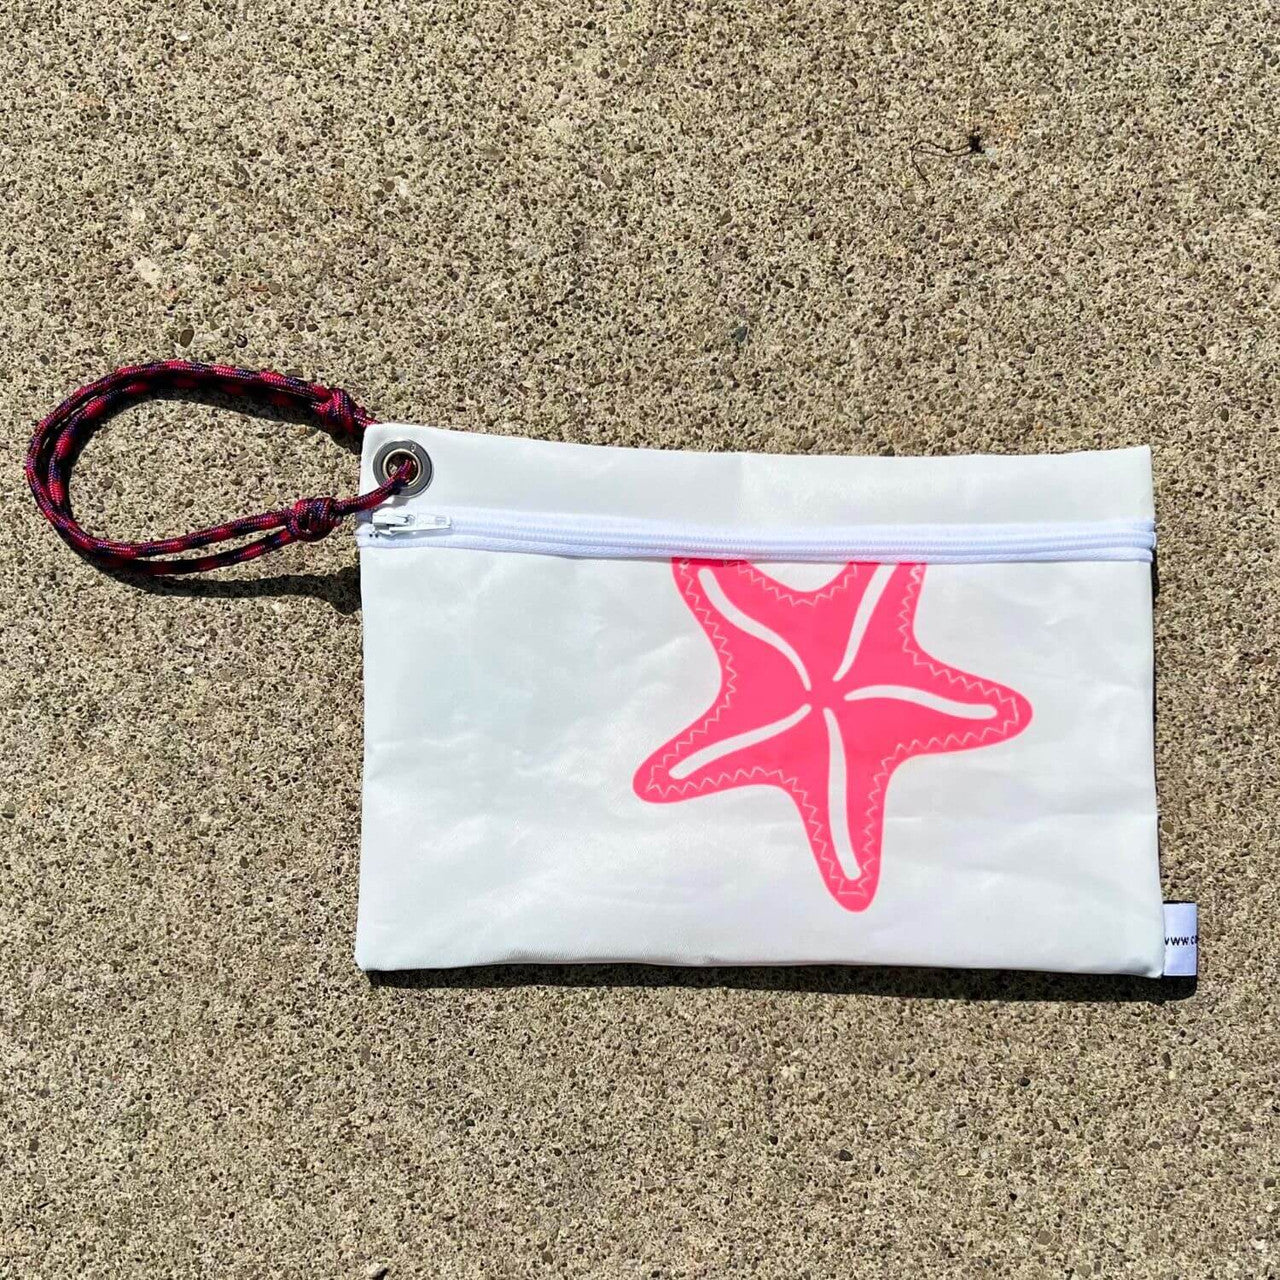 Recycled Sail Wristlet Handbags, Wallets & Cases New England Trading Co Pink Starfish  